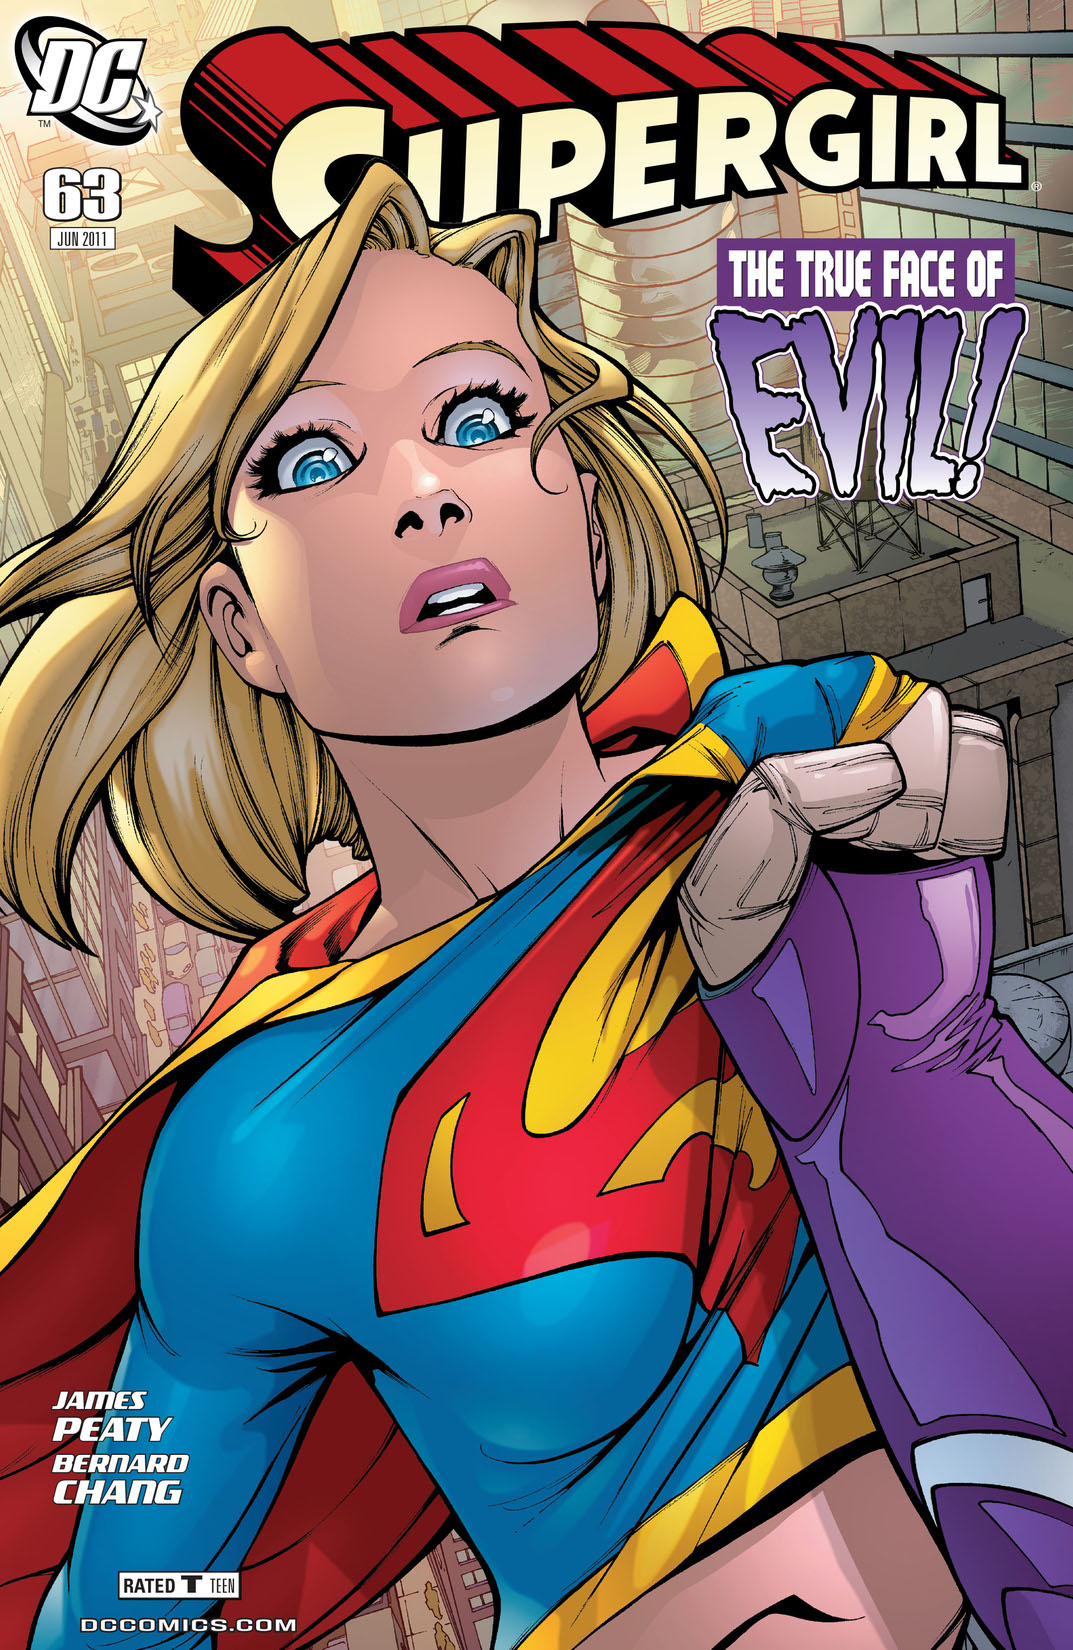 Supergirl (2005-) #63 preview images